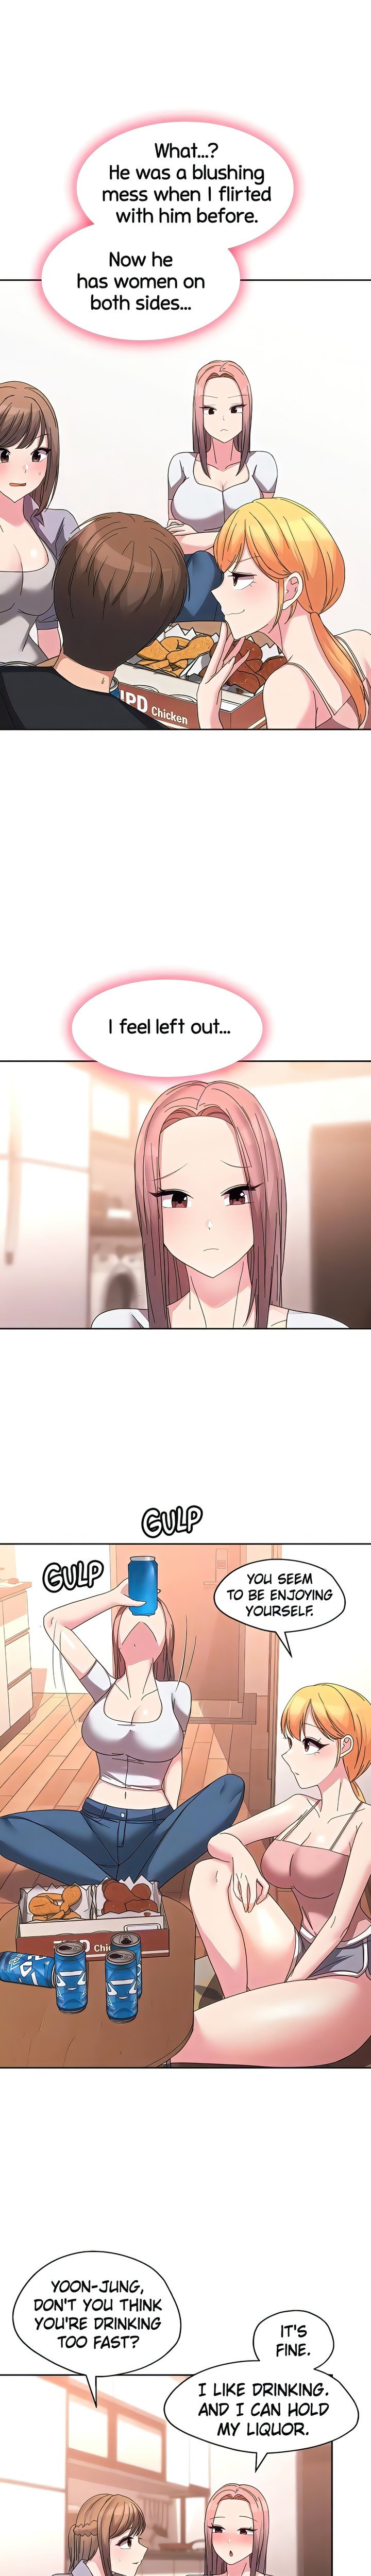 girls-i-used-to-teach-chap-31-7